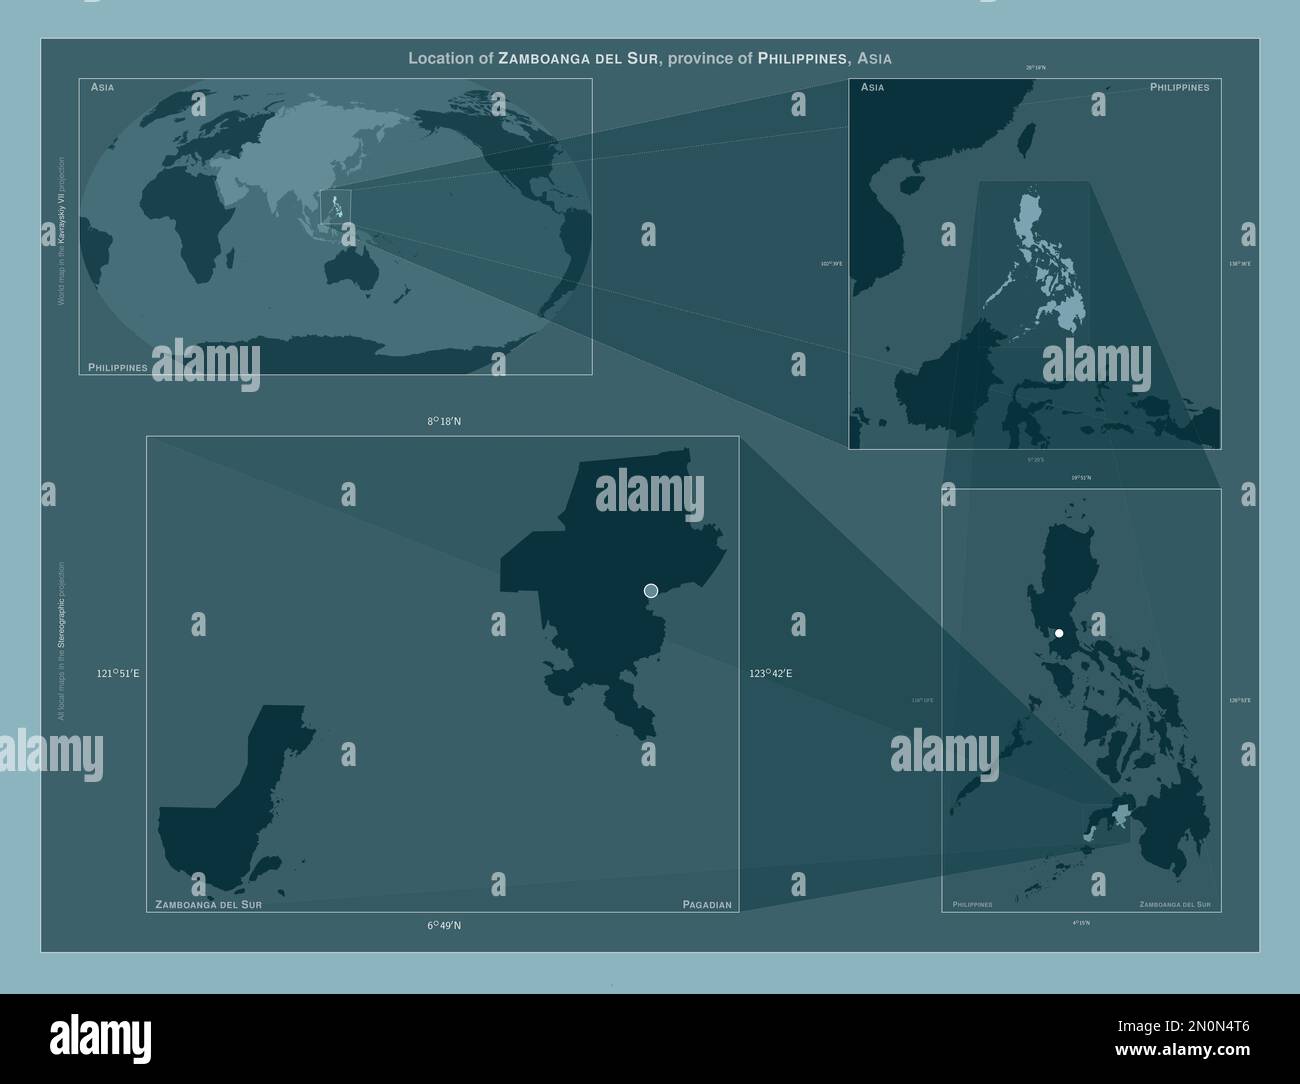 Zamboanga del Sur, province of Philippines. Diagram showing the location of the region on larger-scale maps. Composition of vector frames and PNG shap Stock Photo